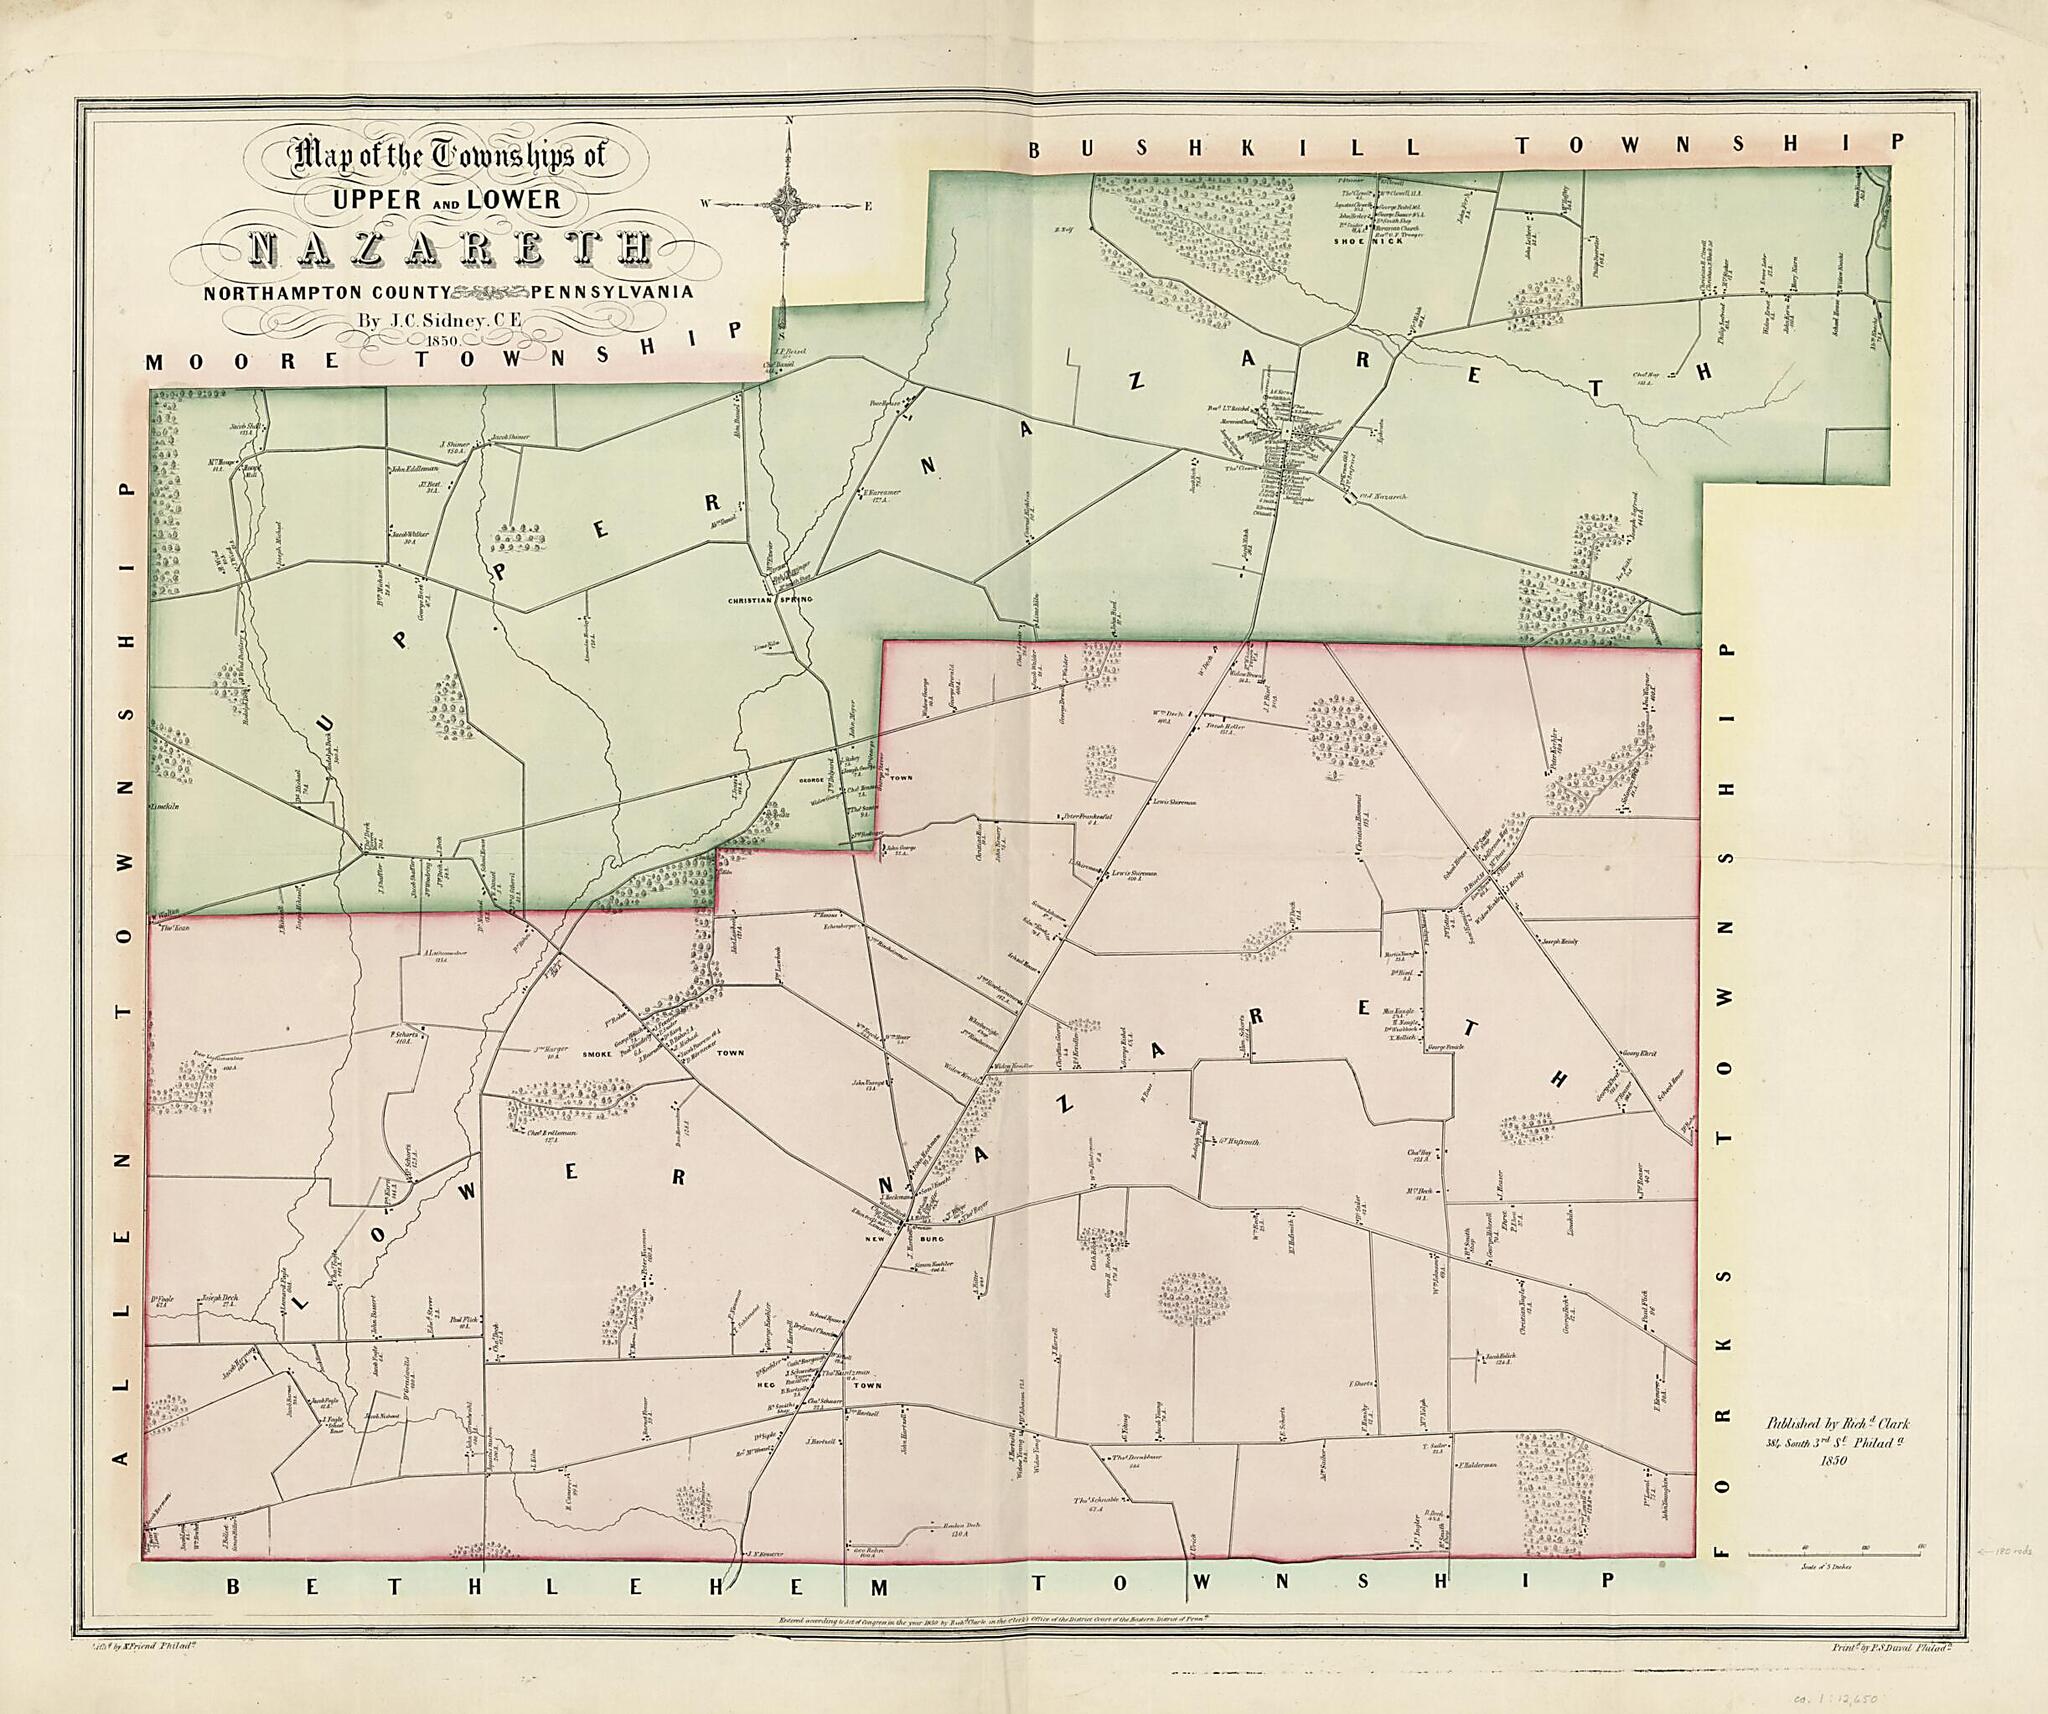 This old map of Map of the Townships of Upper and Lower Nazareth, Northampton County, Pennsylvania from 1850 was created by Richard Clark, Norman M. Friend, J. C. (James C.) Sidney in 1850